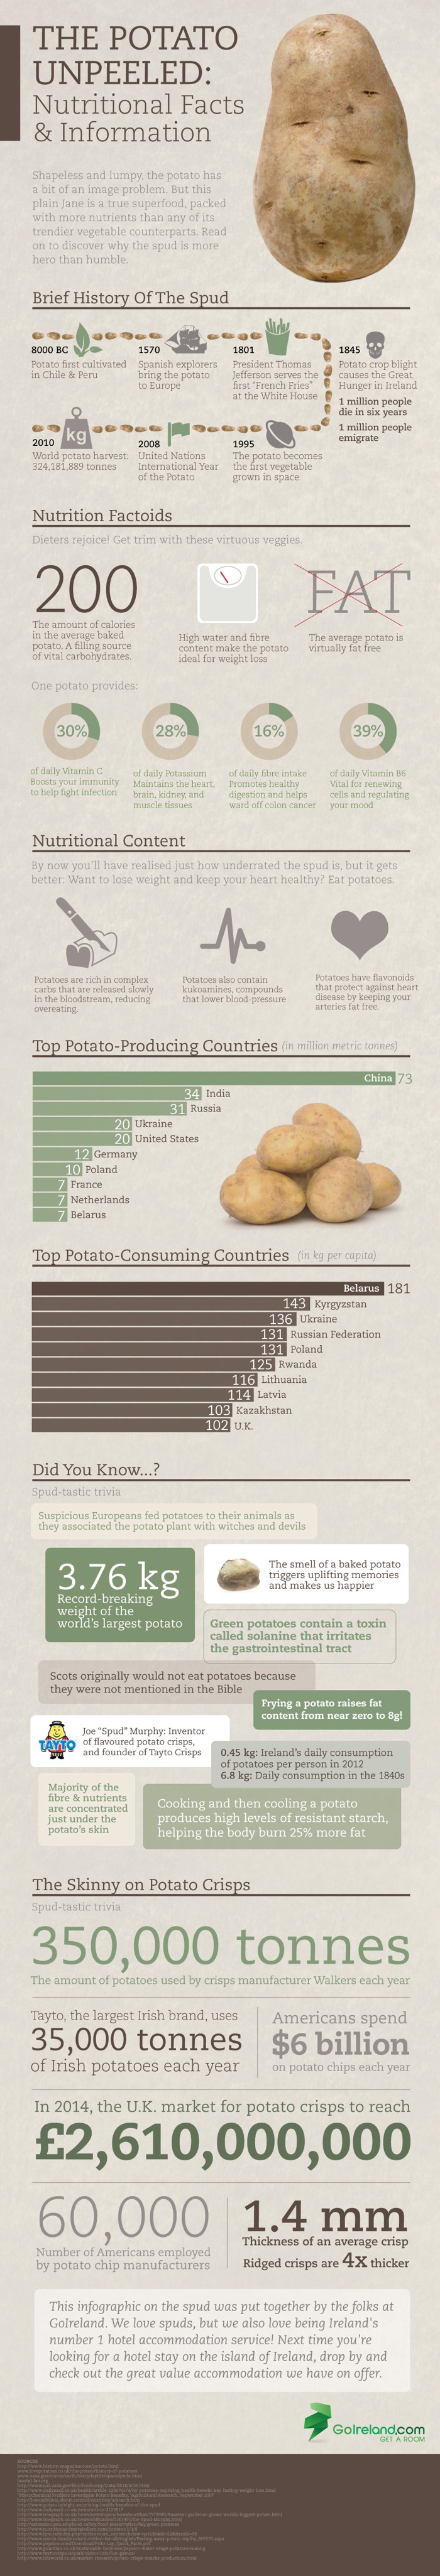 Potato: Nutritional Facts & Information